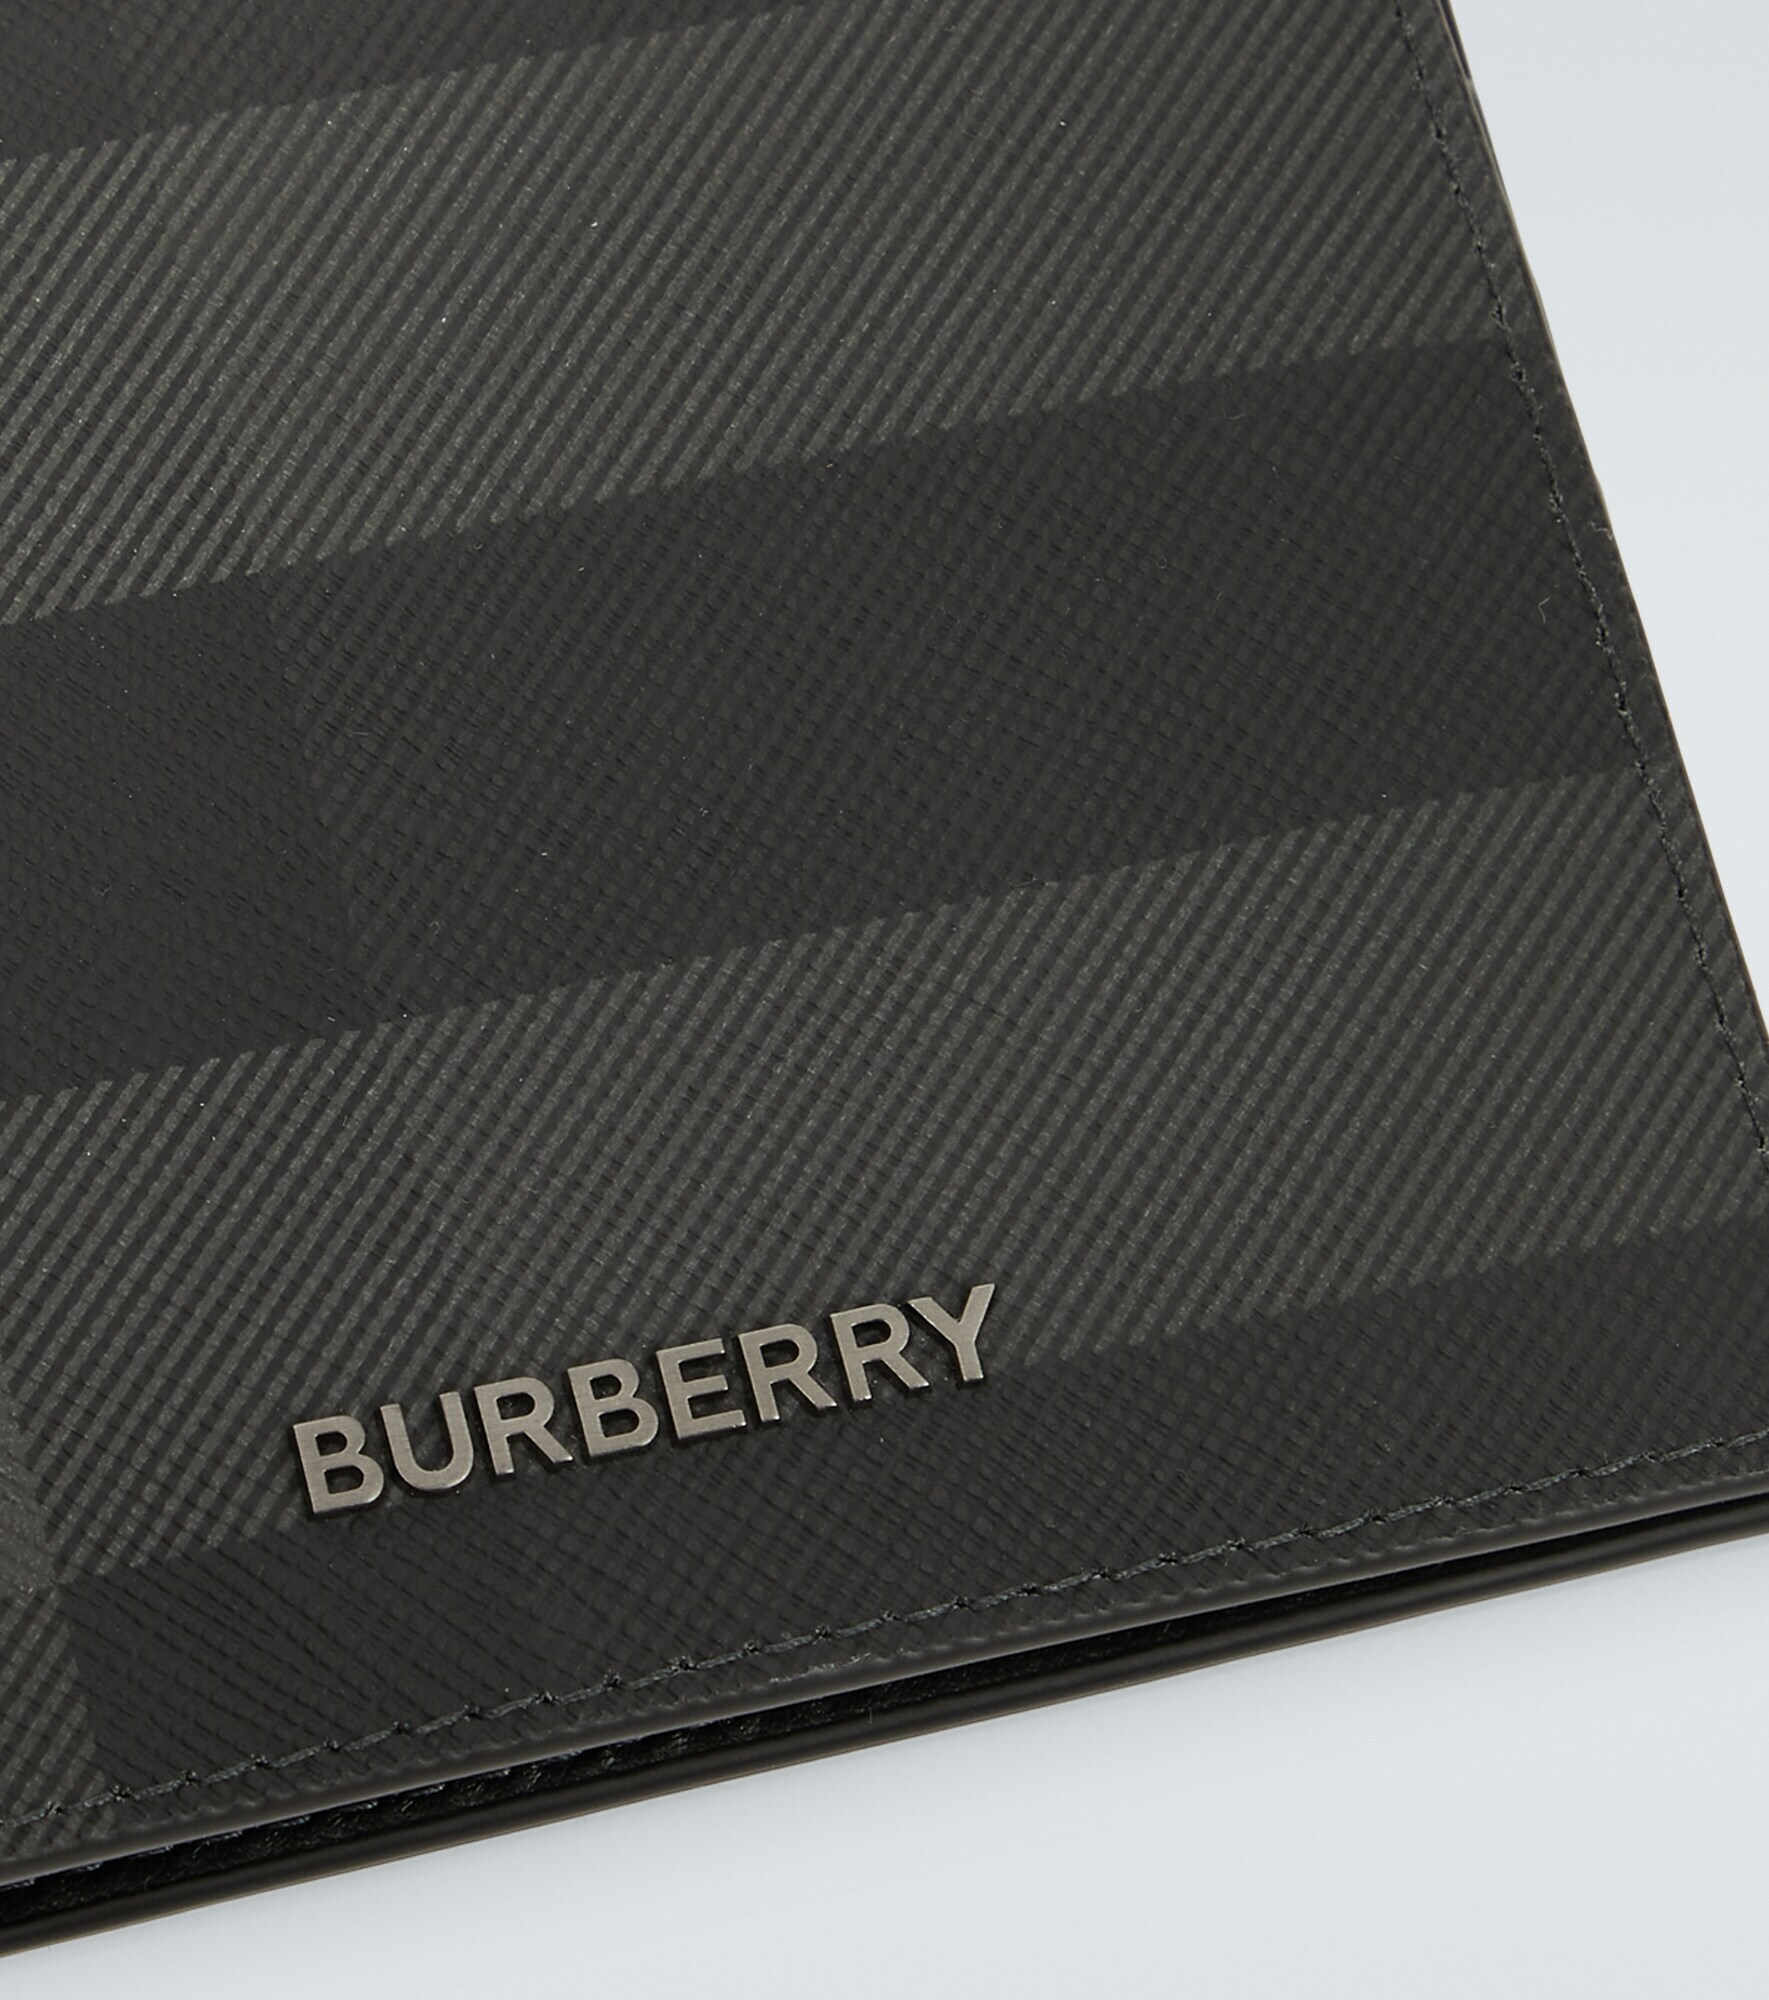 Burberry - House check wallet Burberry